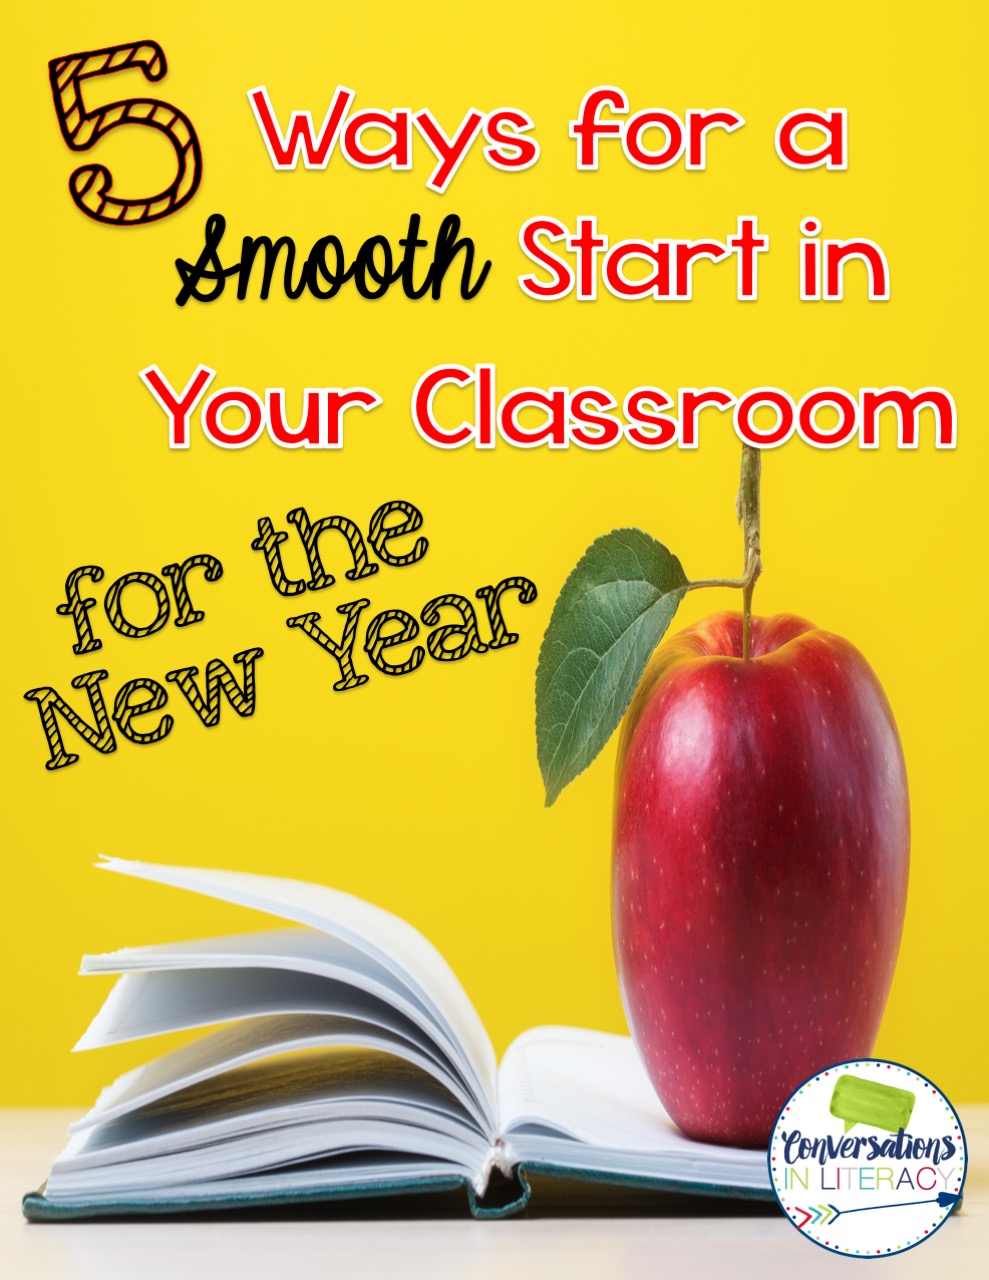 Preschool Supplies: Getting your classroom ready for the year